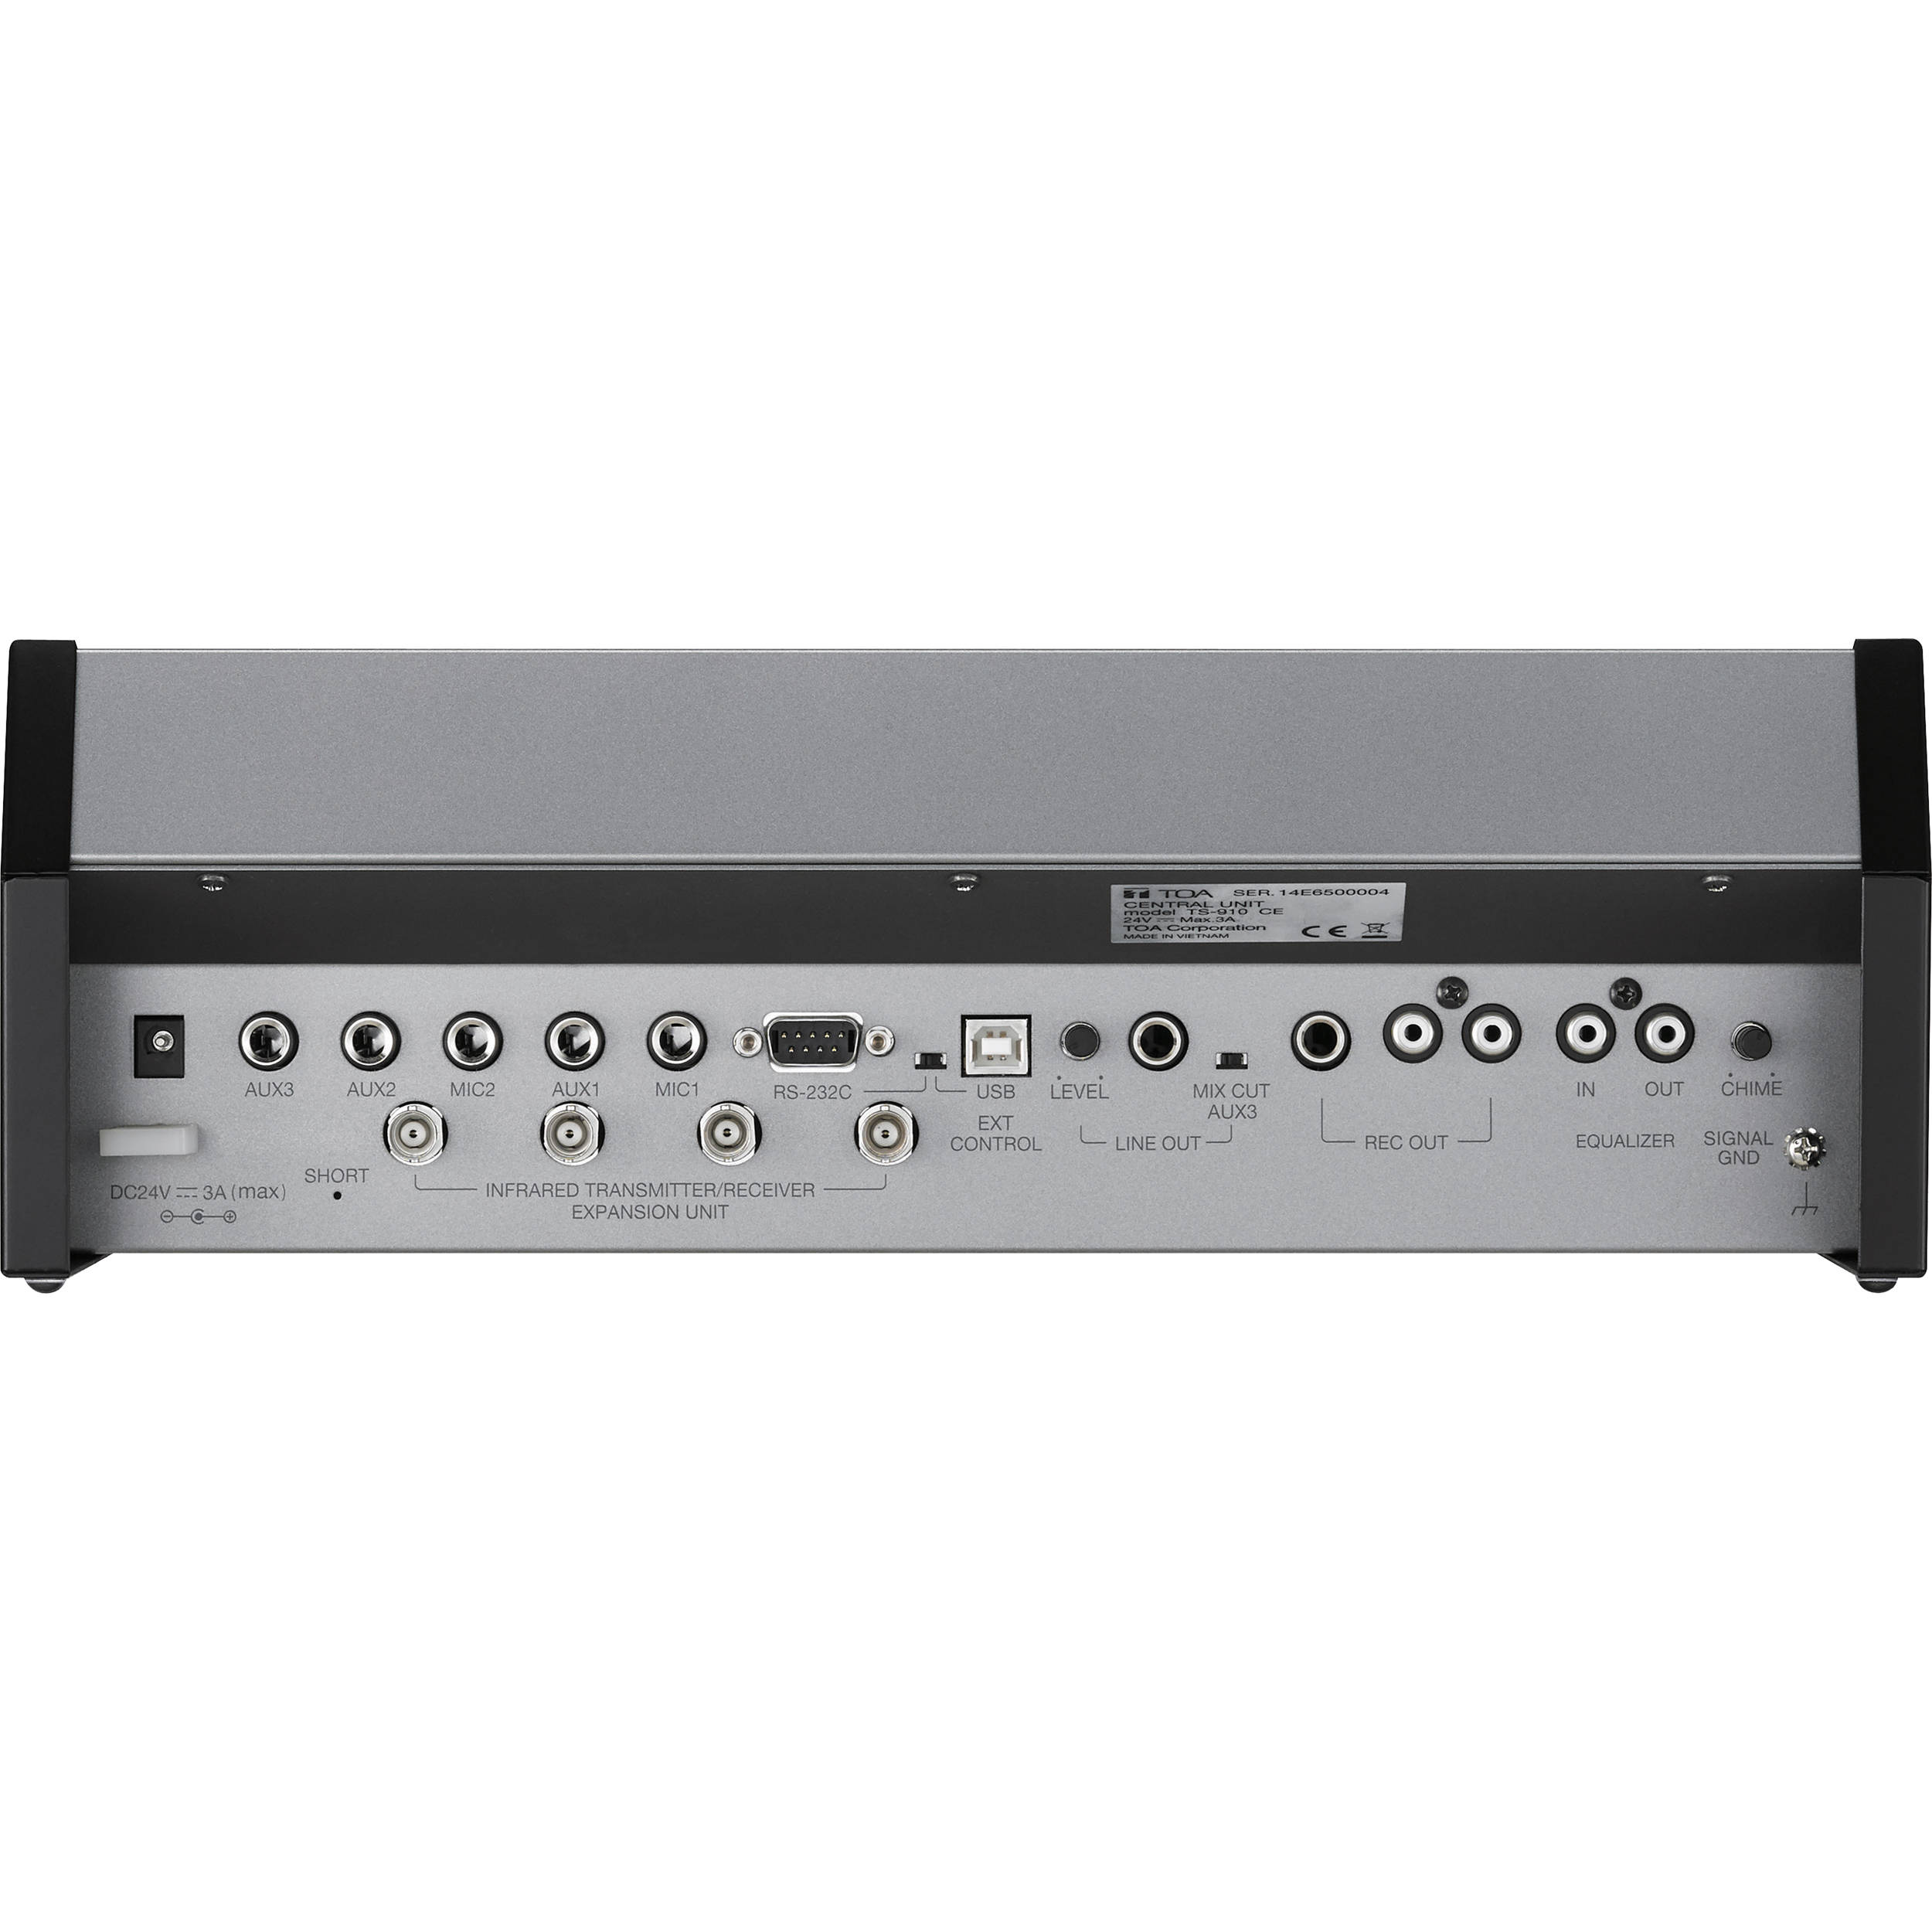 TOA TS-910-US System Controller for TS-910/TS-810 Series Conference System